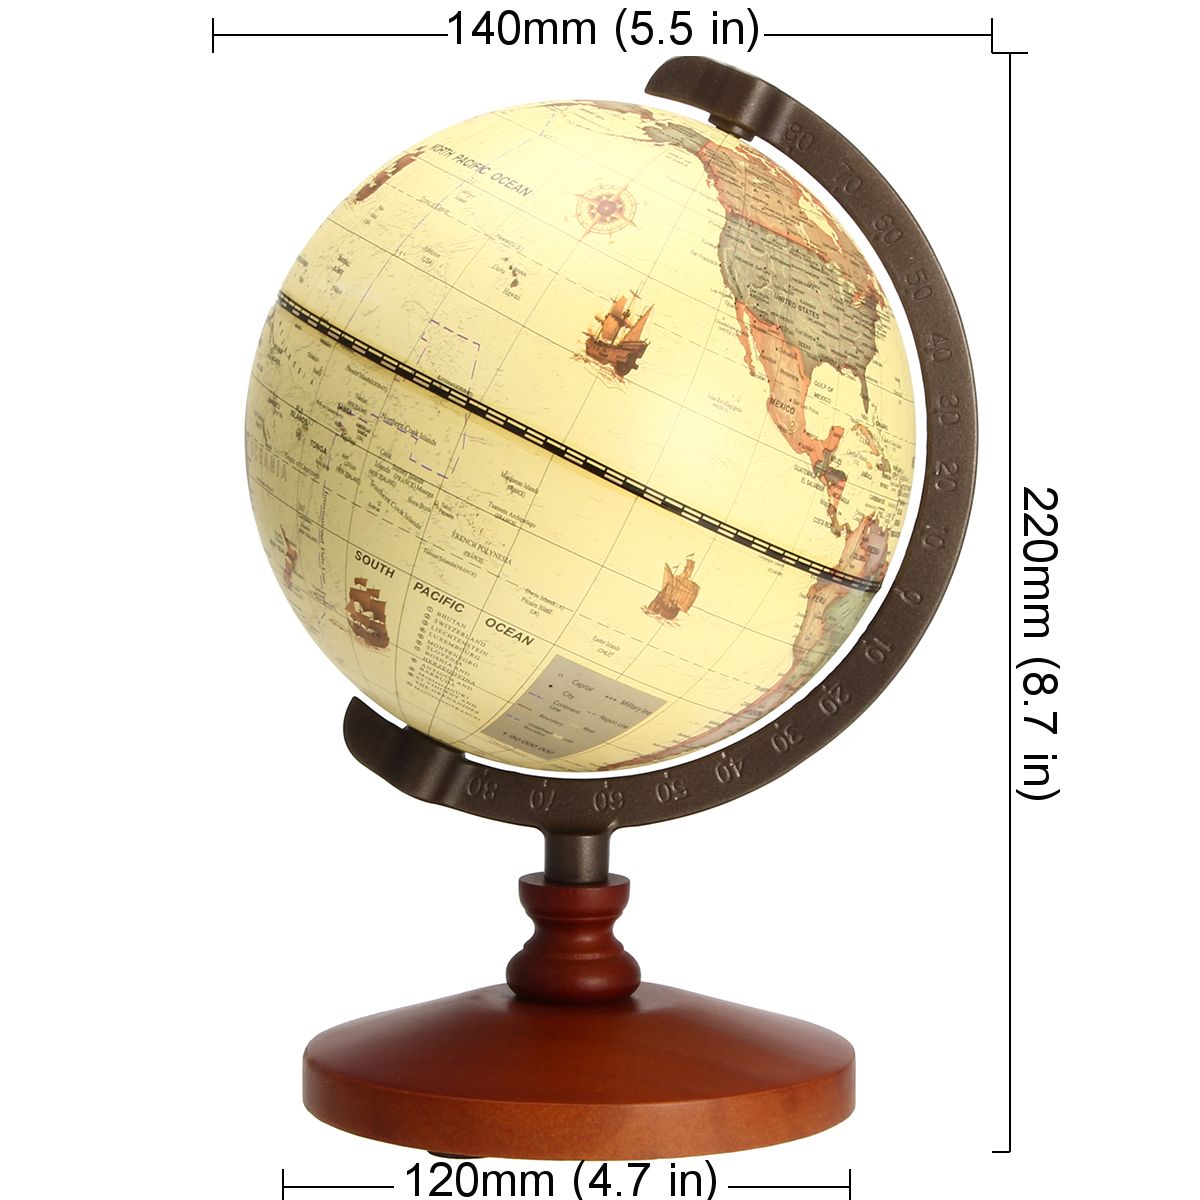 55quot-Vintage-Desktop-Table-Rotating-Earth-World-Map-Globe-Antique-Geography-Home-Decor-Gift-Toys-1266388